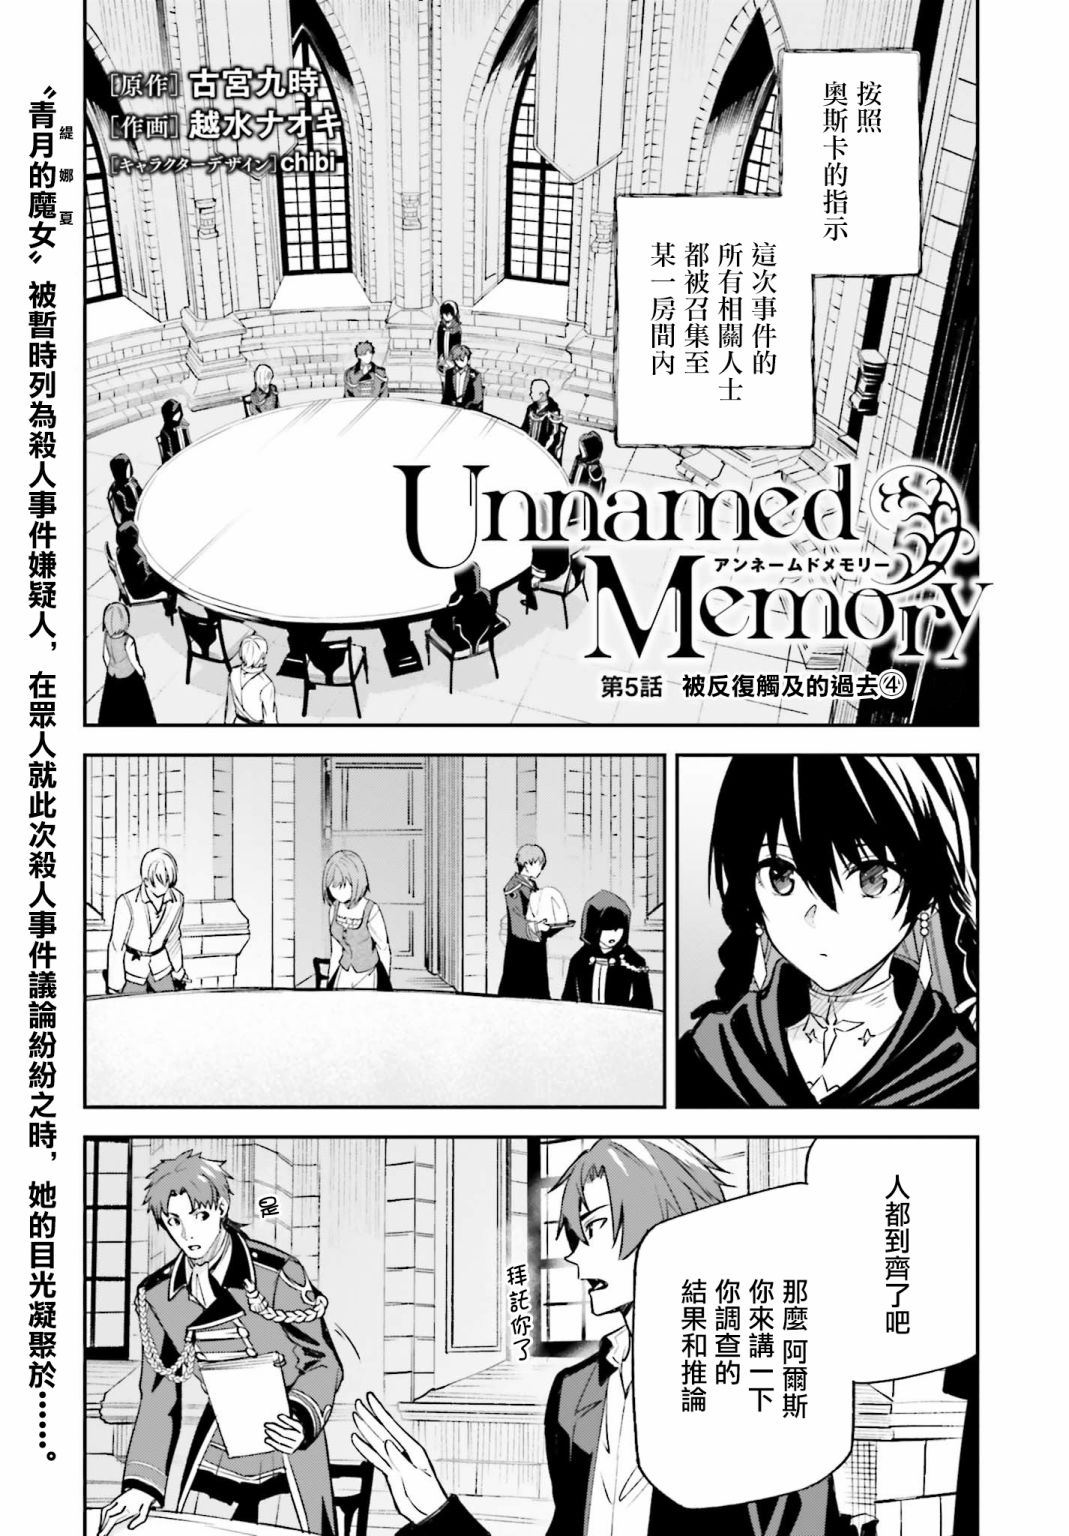 Unnamed Memory - 第5話 - 1